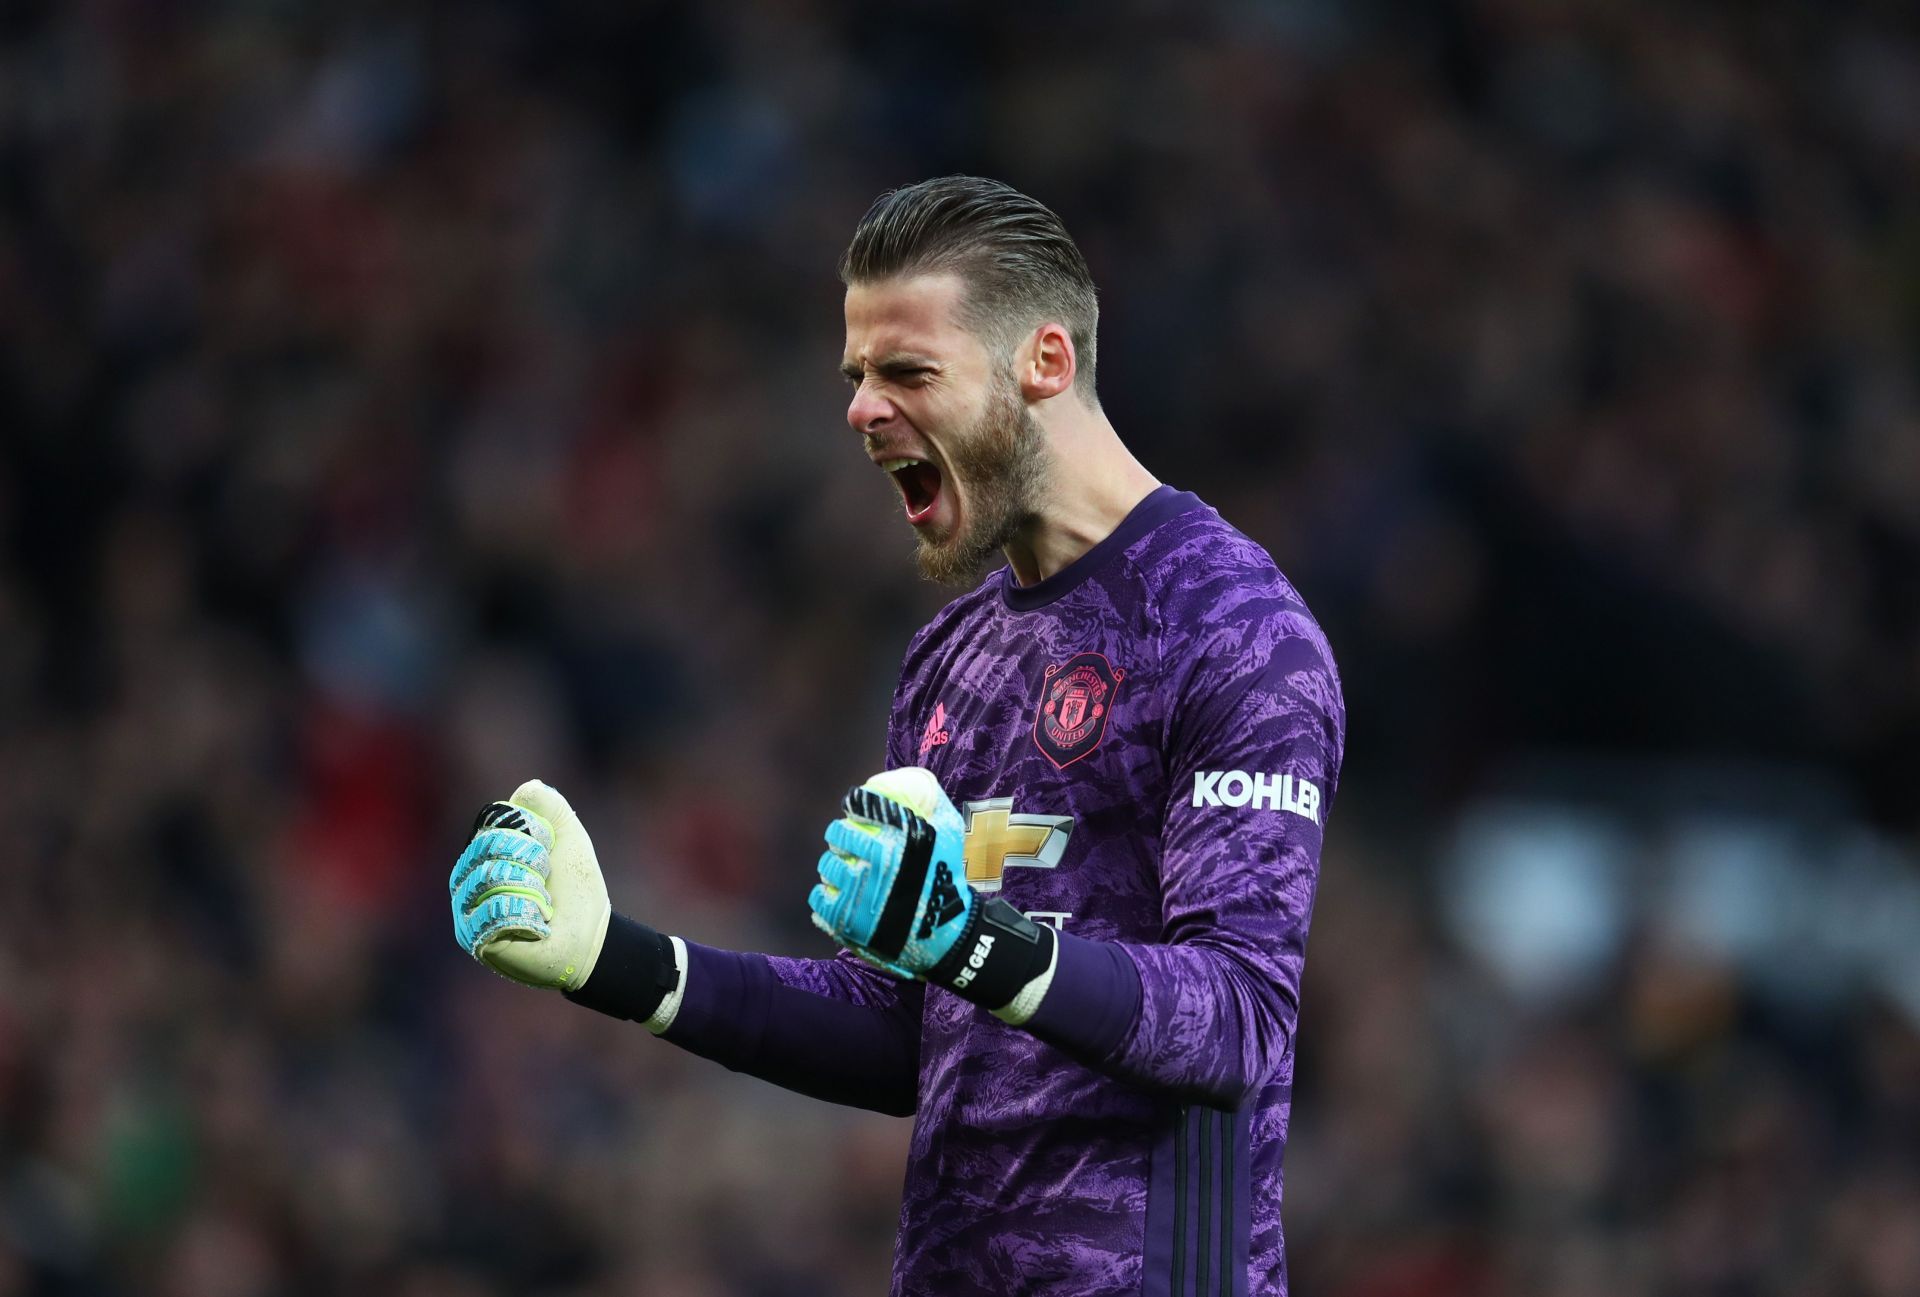 David de Gea is the highest paid goalkeeper in the EPL